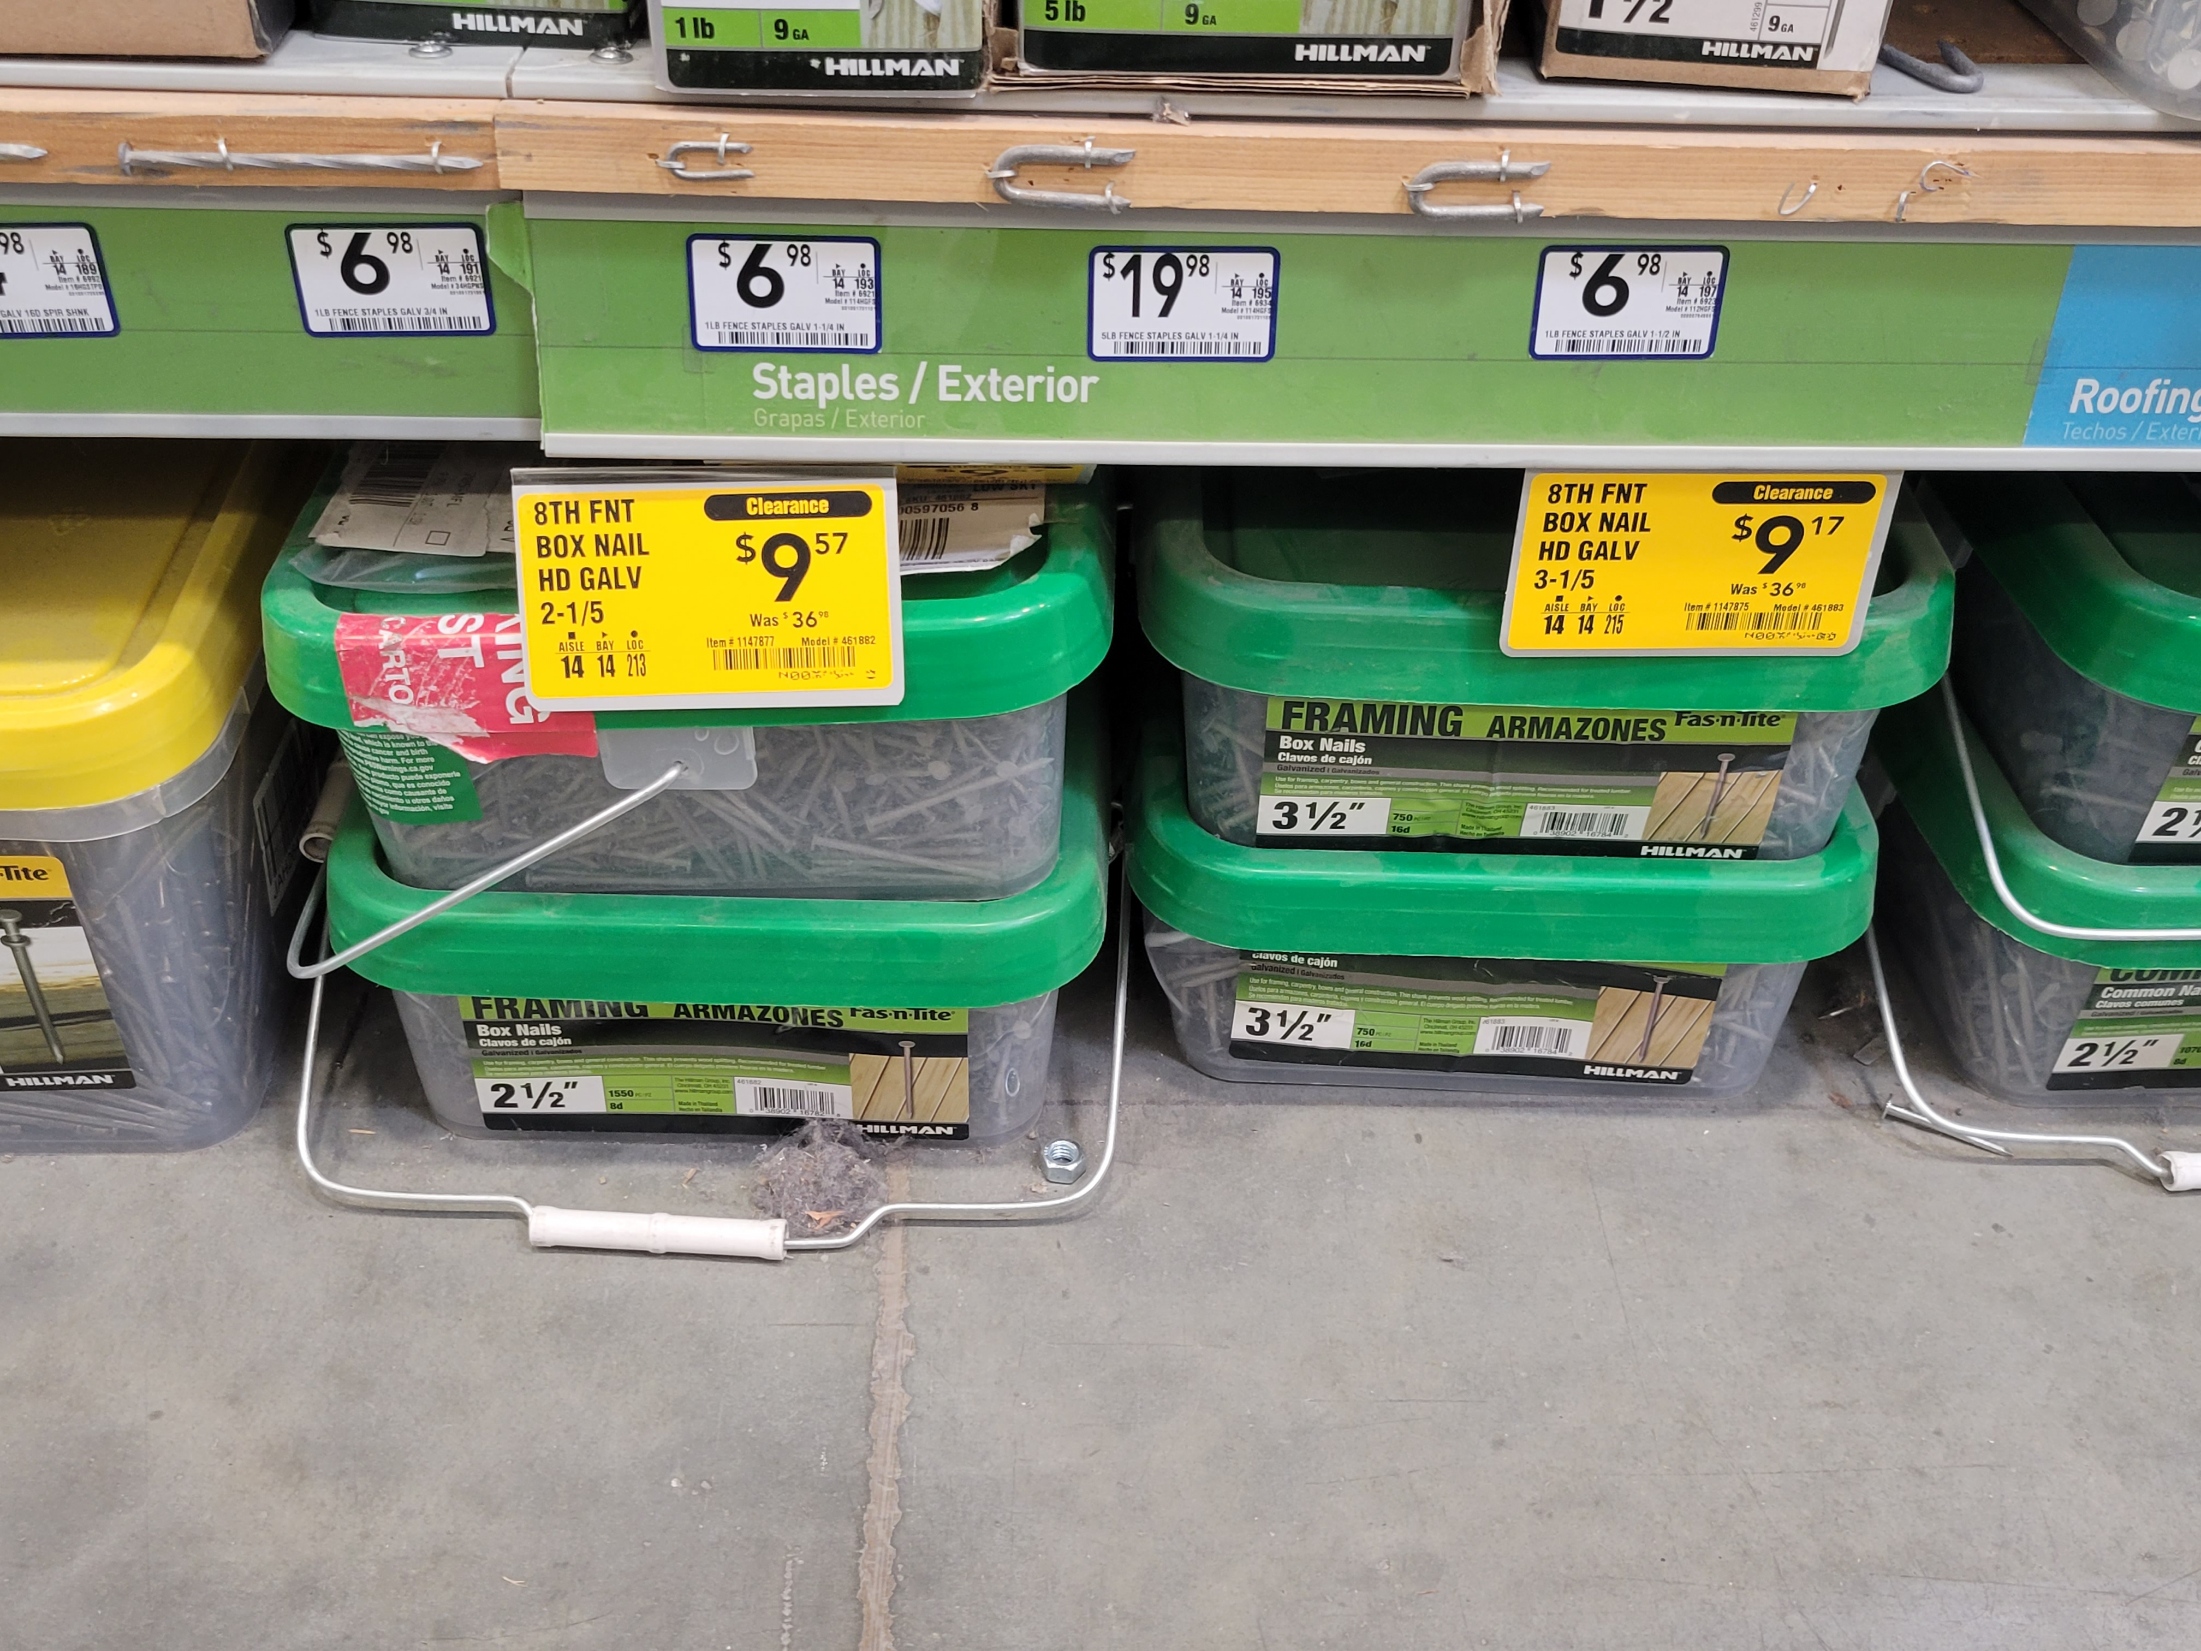 12lbs Hot Dipped Galvanized Nails, 2 1/2" or 3 1/2" - Lowes in store only YMMV $9.17